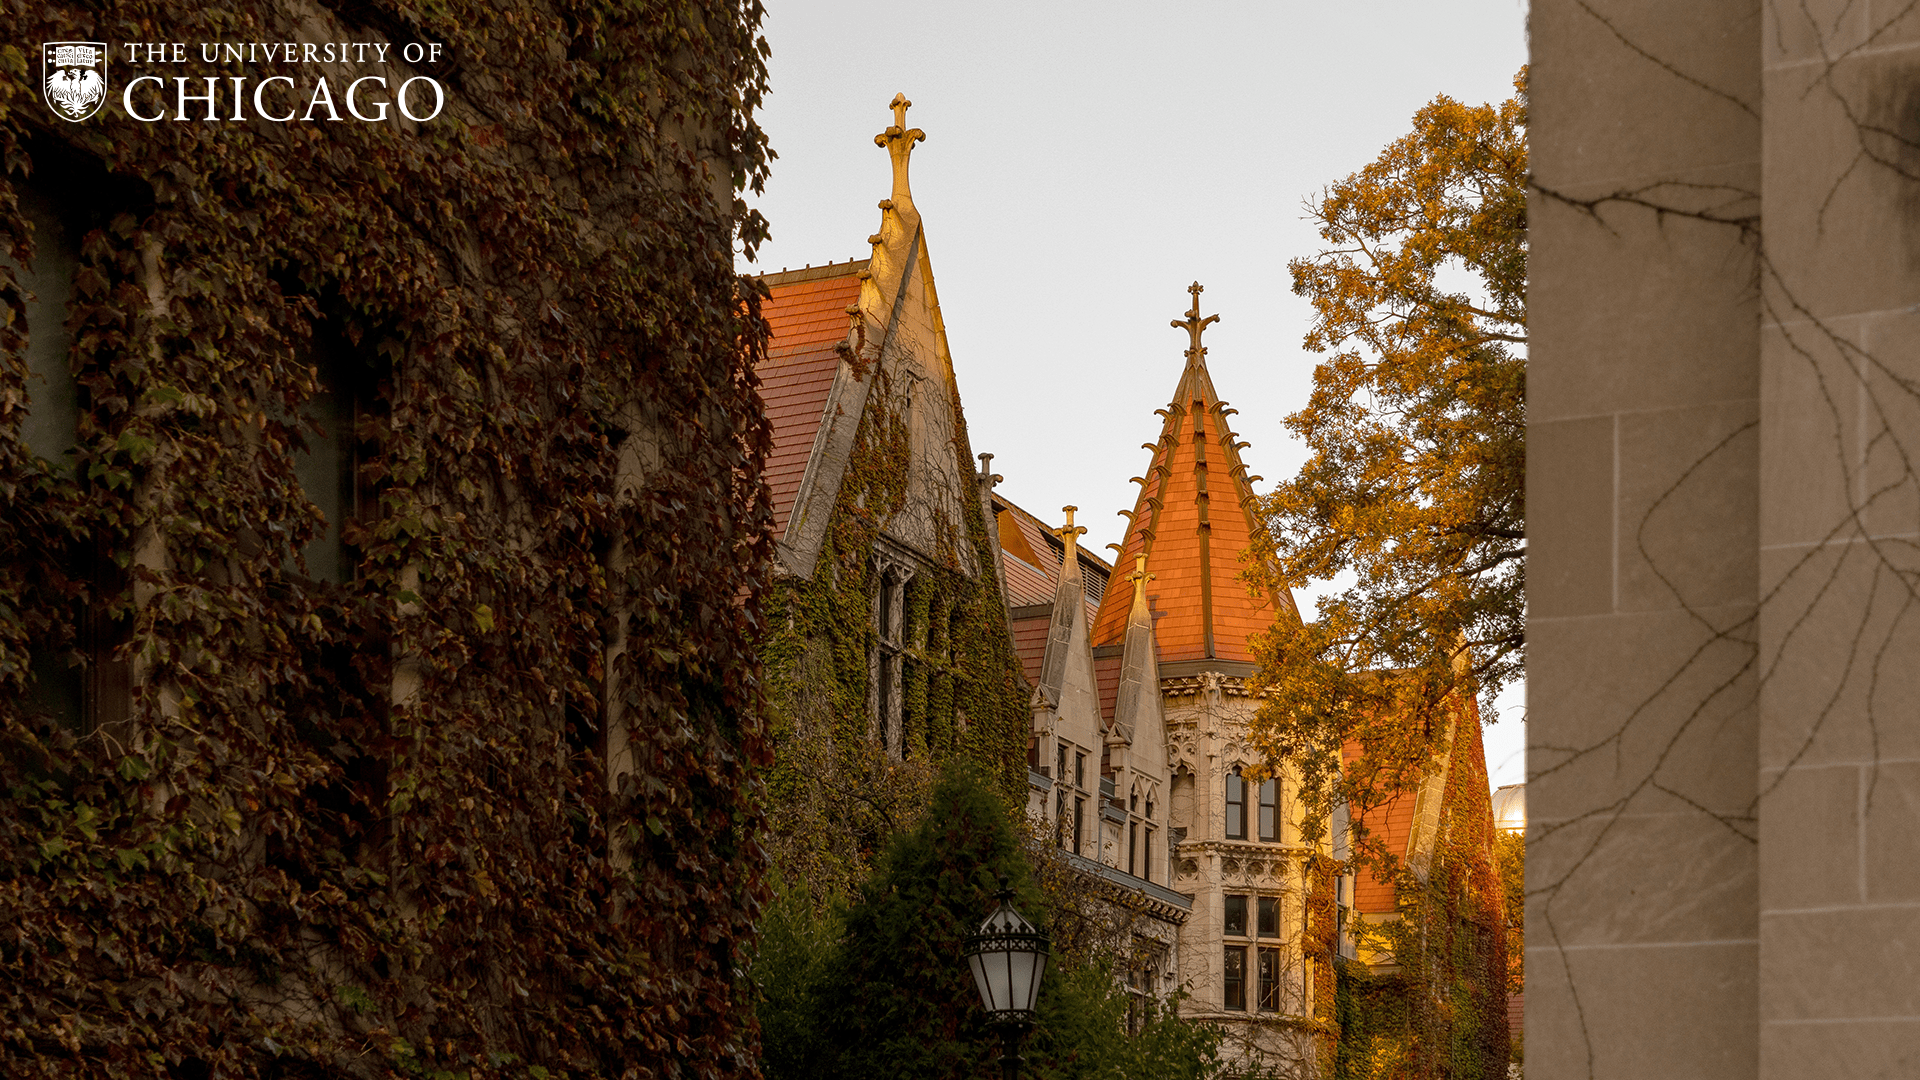 View of terracotta tower spires in the evening sun